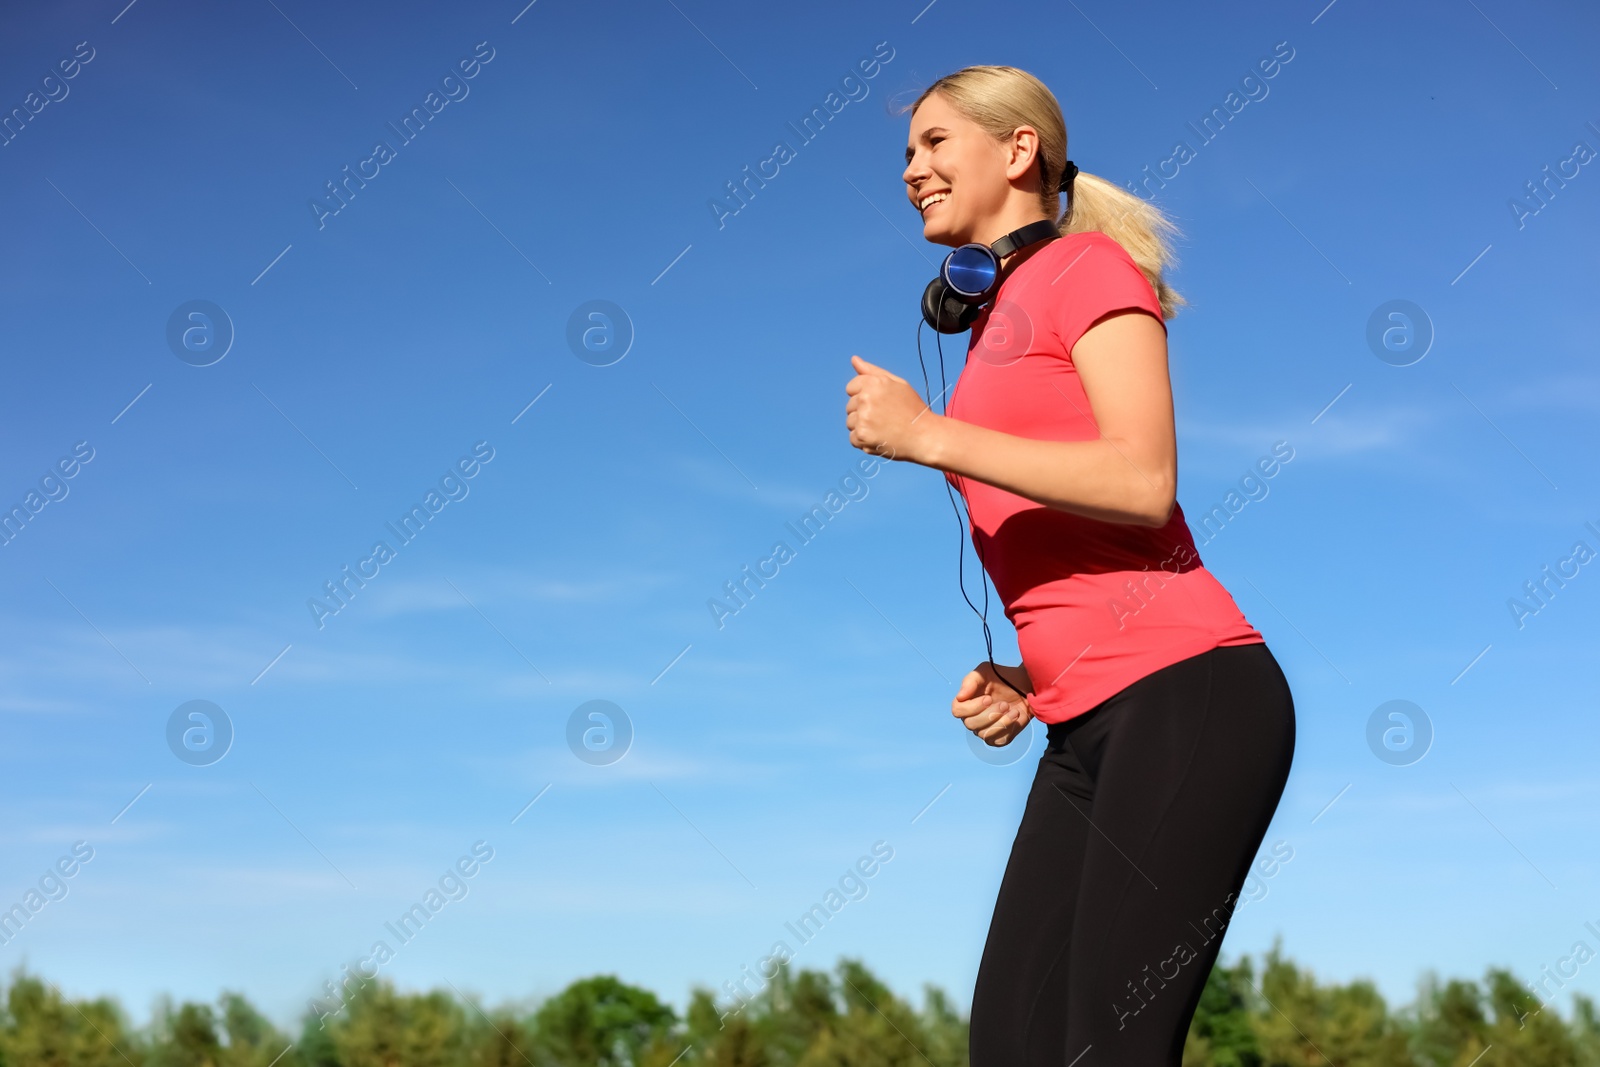 Photo of Woman with headphones running outdoors in morning, low angle view. Space for text